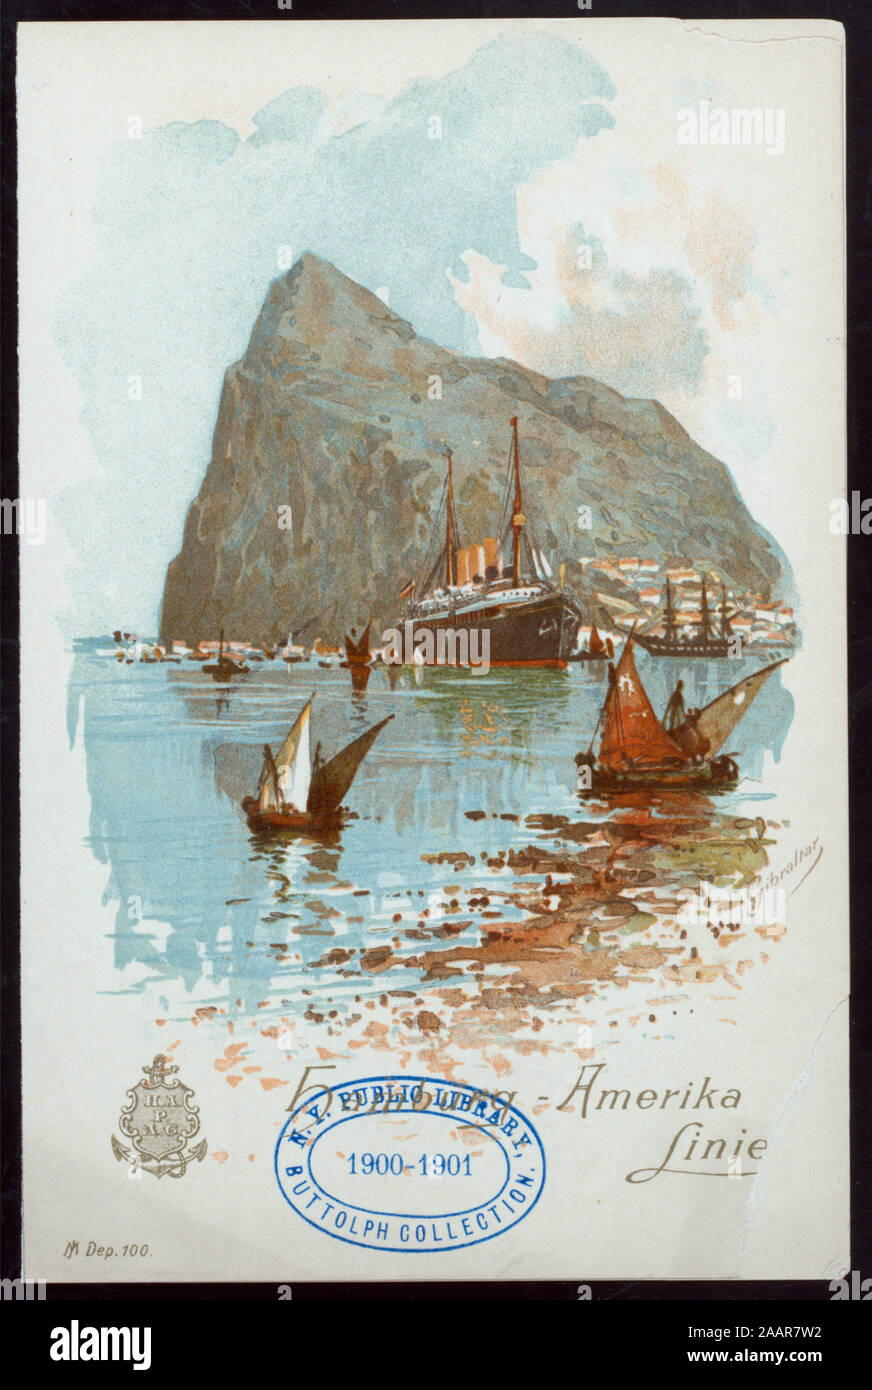 DINNER (held by) HAMBURG-AMERIKA LINIE (at) ABOARD ESPRESS STEAMER AUGUSTE VICTORIA (SS;) MENU IN GERMAN AND ENGLISH; MUSICAL PROGAM; ILLUSTATION OF MEDITERRANEAN SHORE 1900-0684; DINNER [held by] HAMBURG-AMERIKA LINIE [at] ABOARD ESPRESS STEAMER AUGUSTE VICTORIA (SS;) Stock Photo